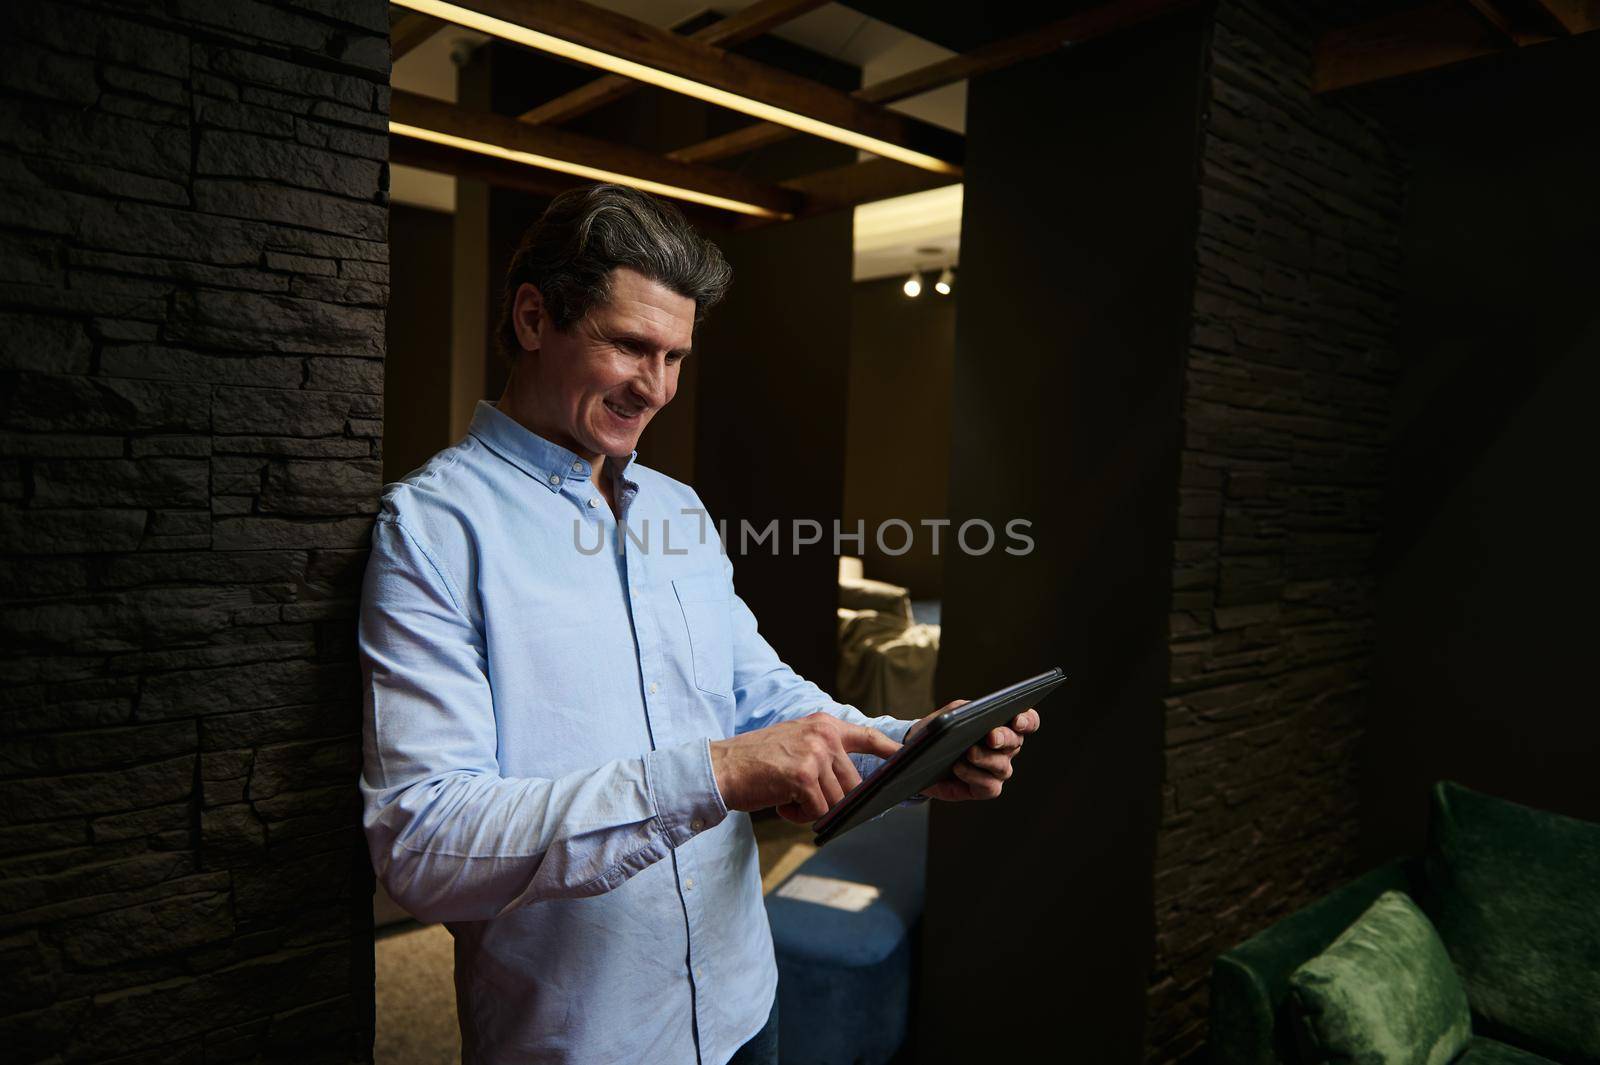 Confident prosperous sales man, real estate agent, interior designer working at a furniture store, using digital tablet and checking orders of new upholstered furniture in an interior design showroom